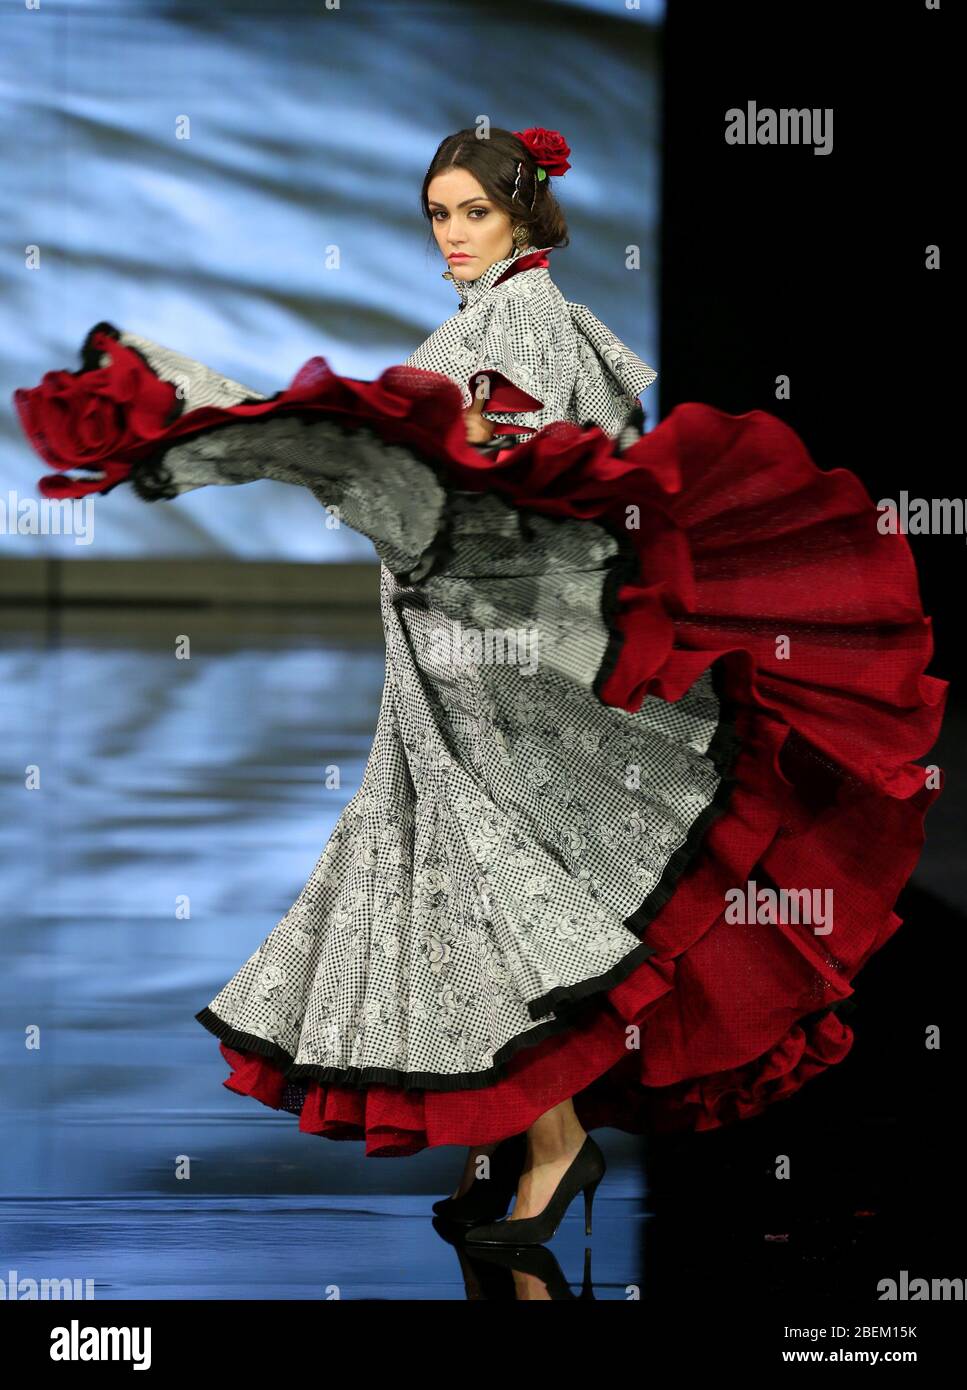 SEVILLA, SPAIN - JAN 30: Model wearing a dress from the Arpegio collection by designer Catarina Santos Rodrigues as part of the SIMOF 2020 (Photo credit: Mickael Chavet) Stock Photo